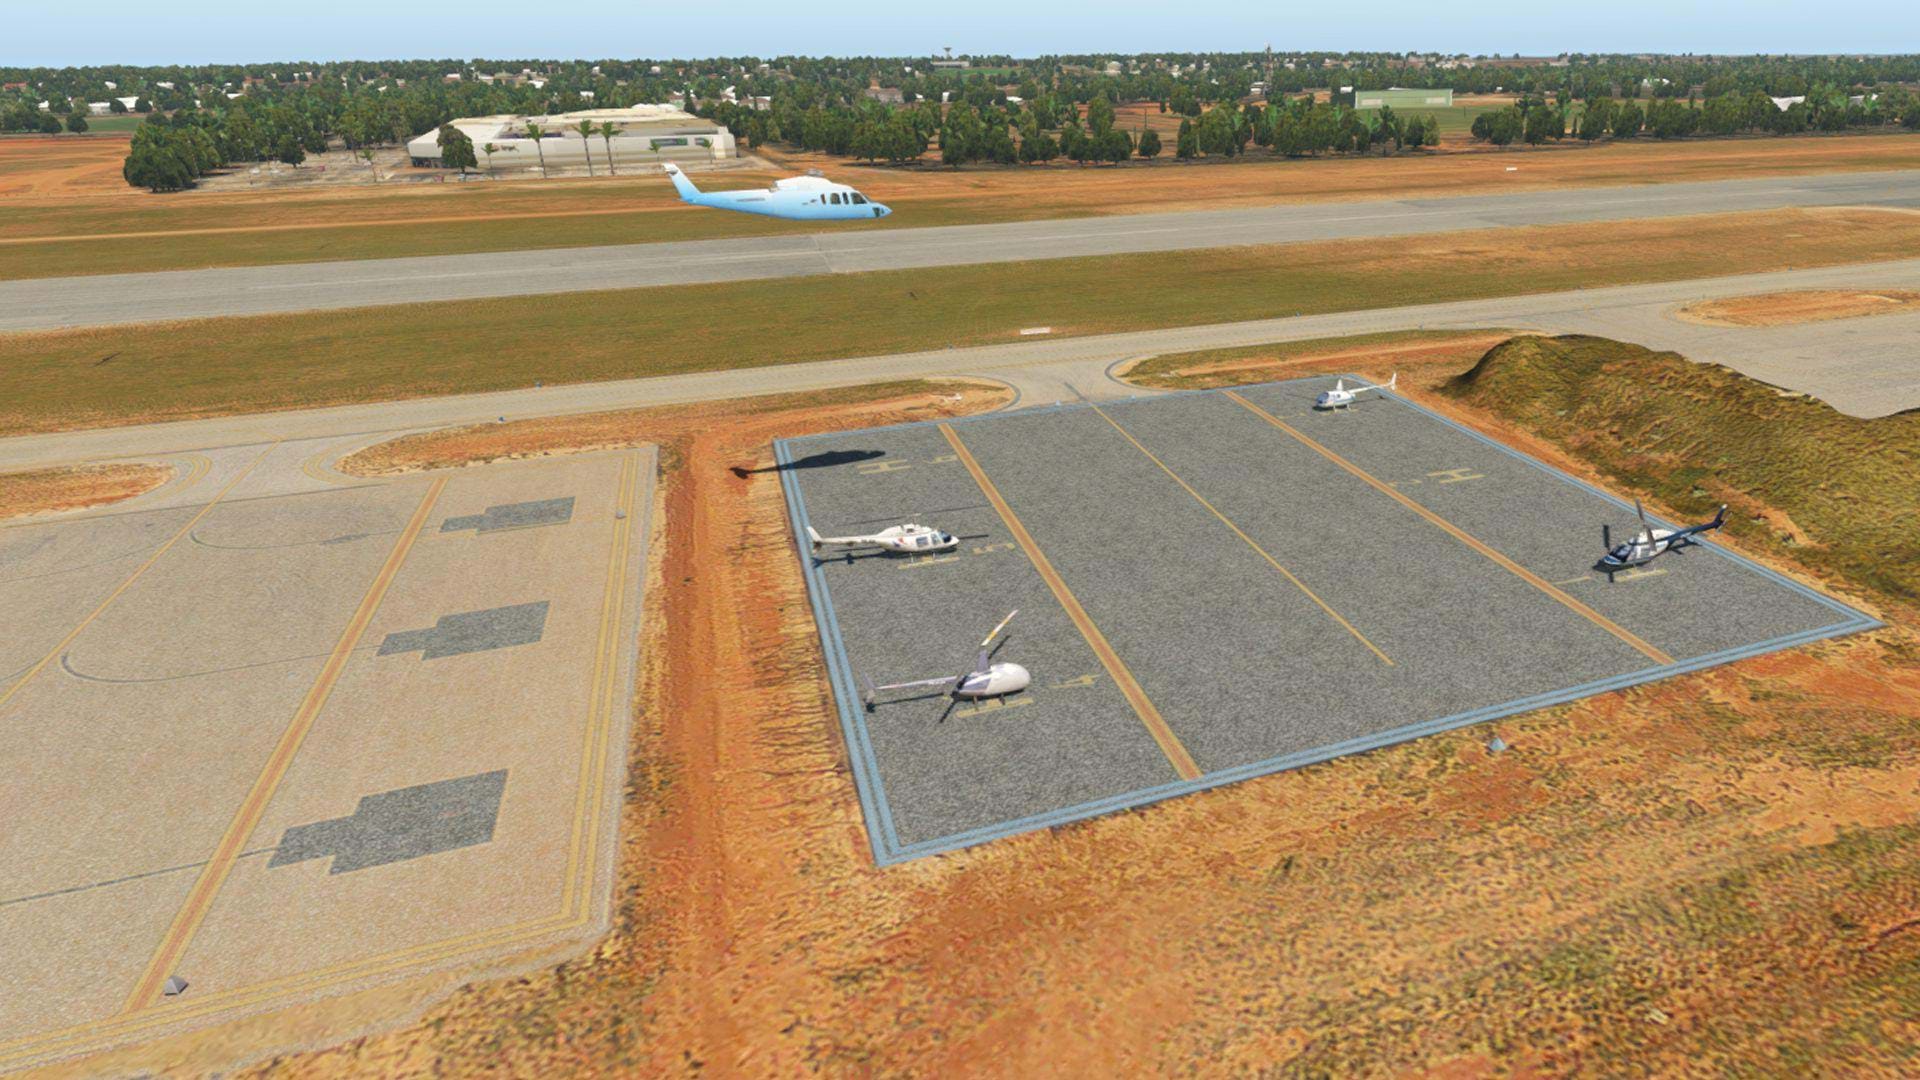 ORBX Broome Intl for X-Plane